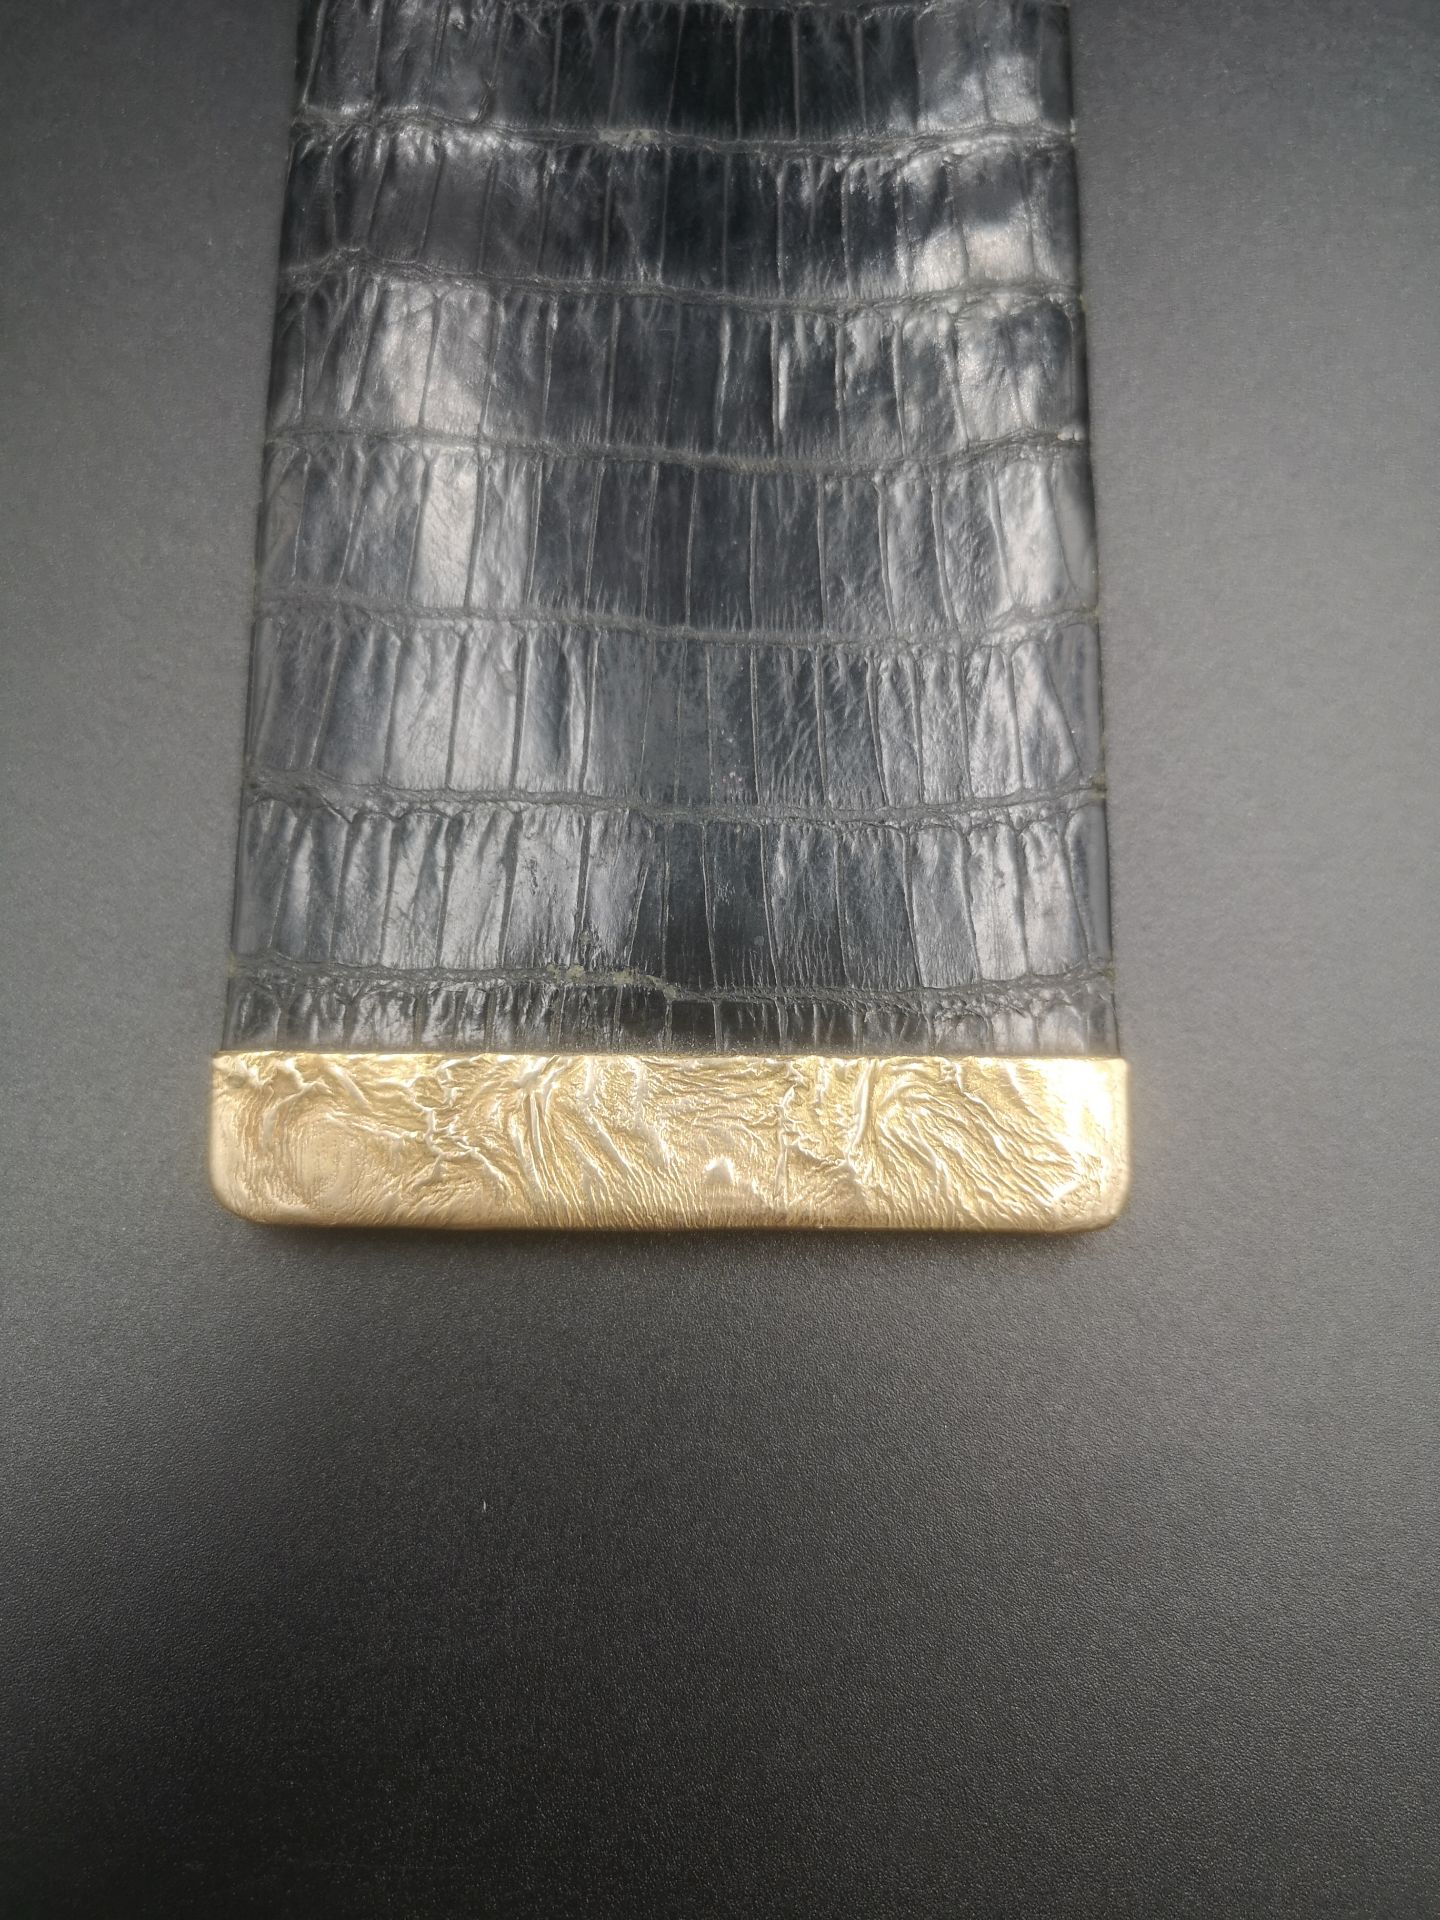 Alligator skin cigar case with 9ct gold mount. CITIES REGULATIONS APPLY TO THIS LOT. - Image 3 of 5